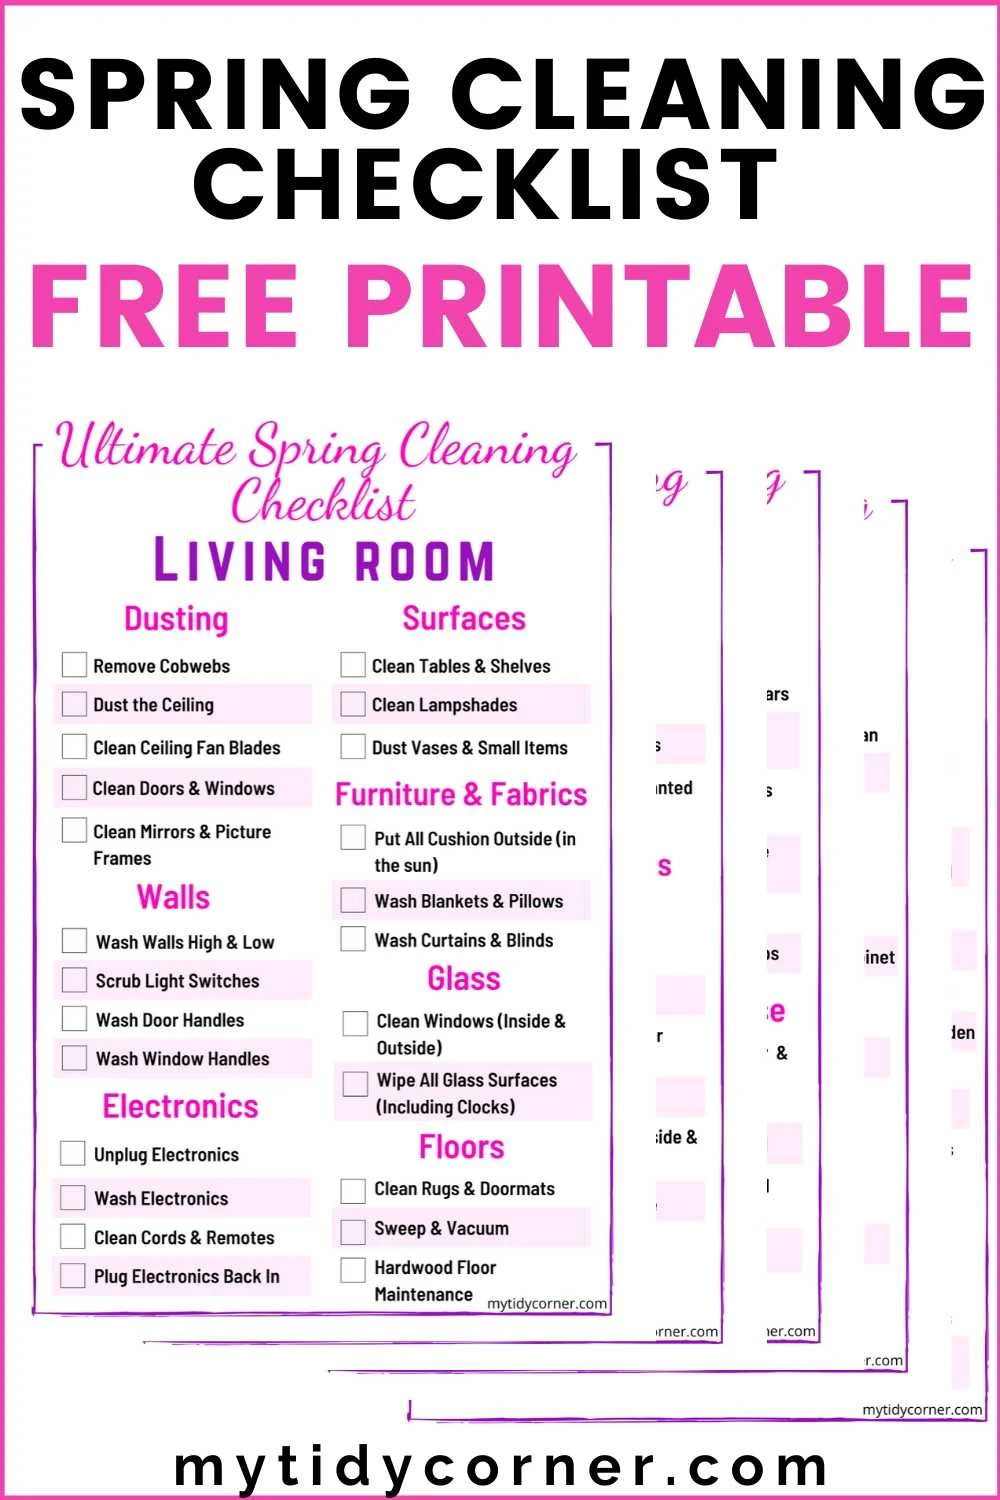 Spring cleaning checklist free printable